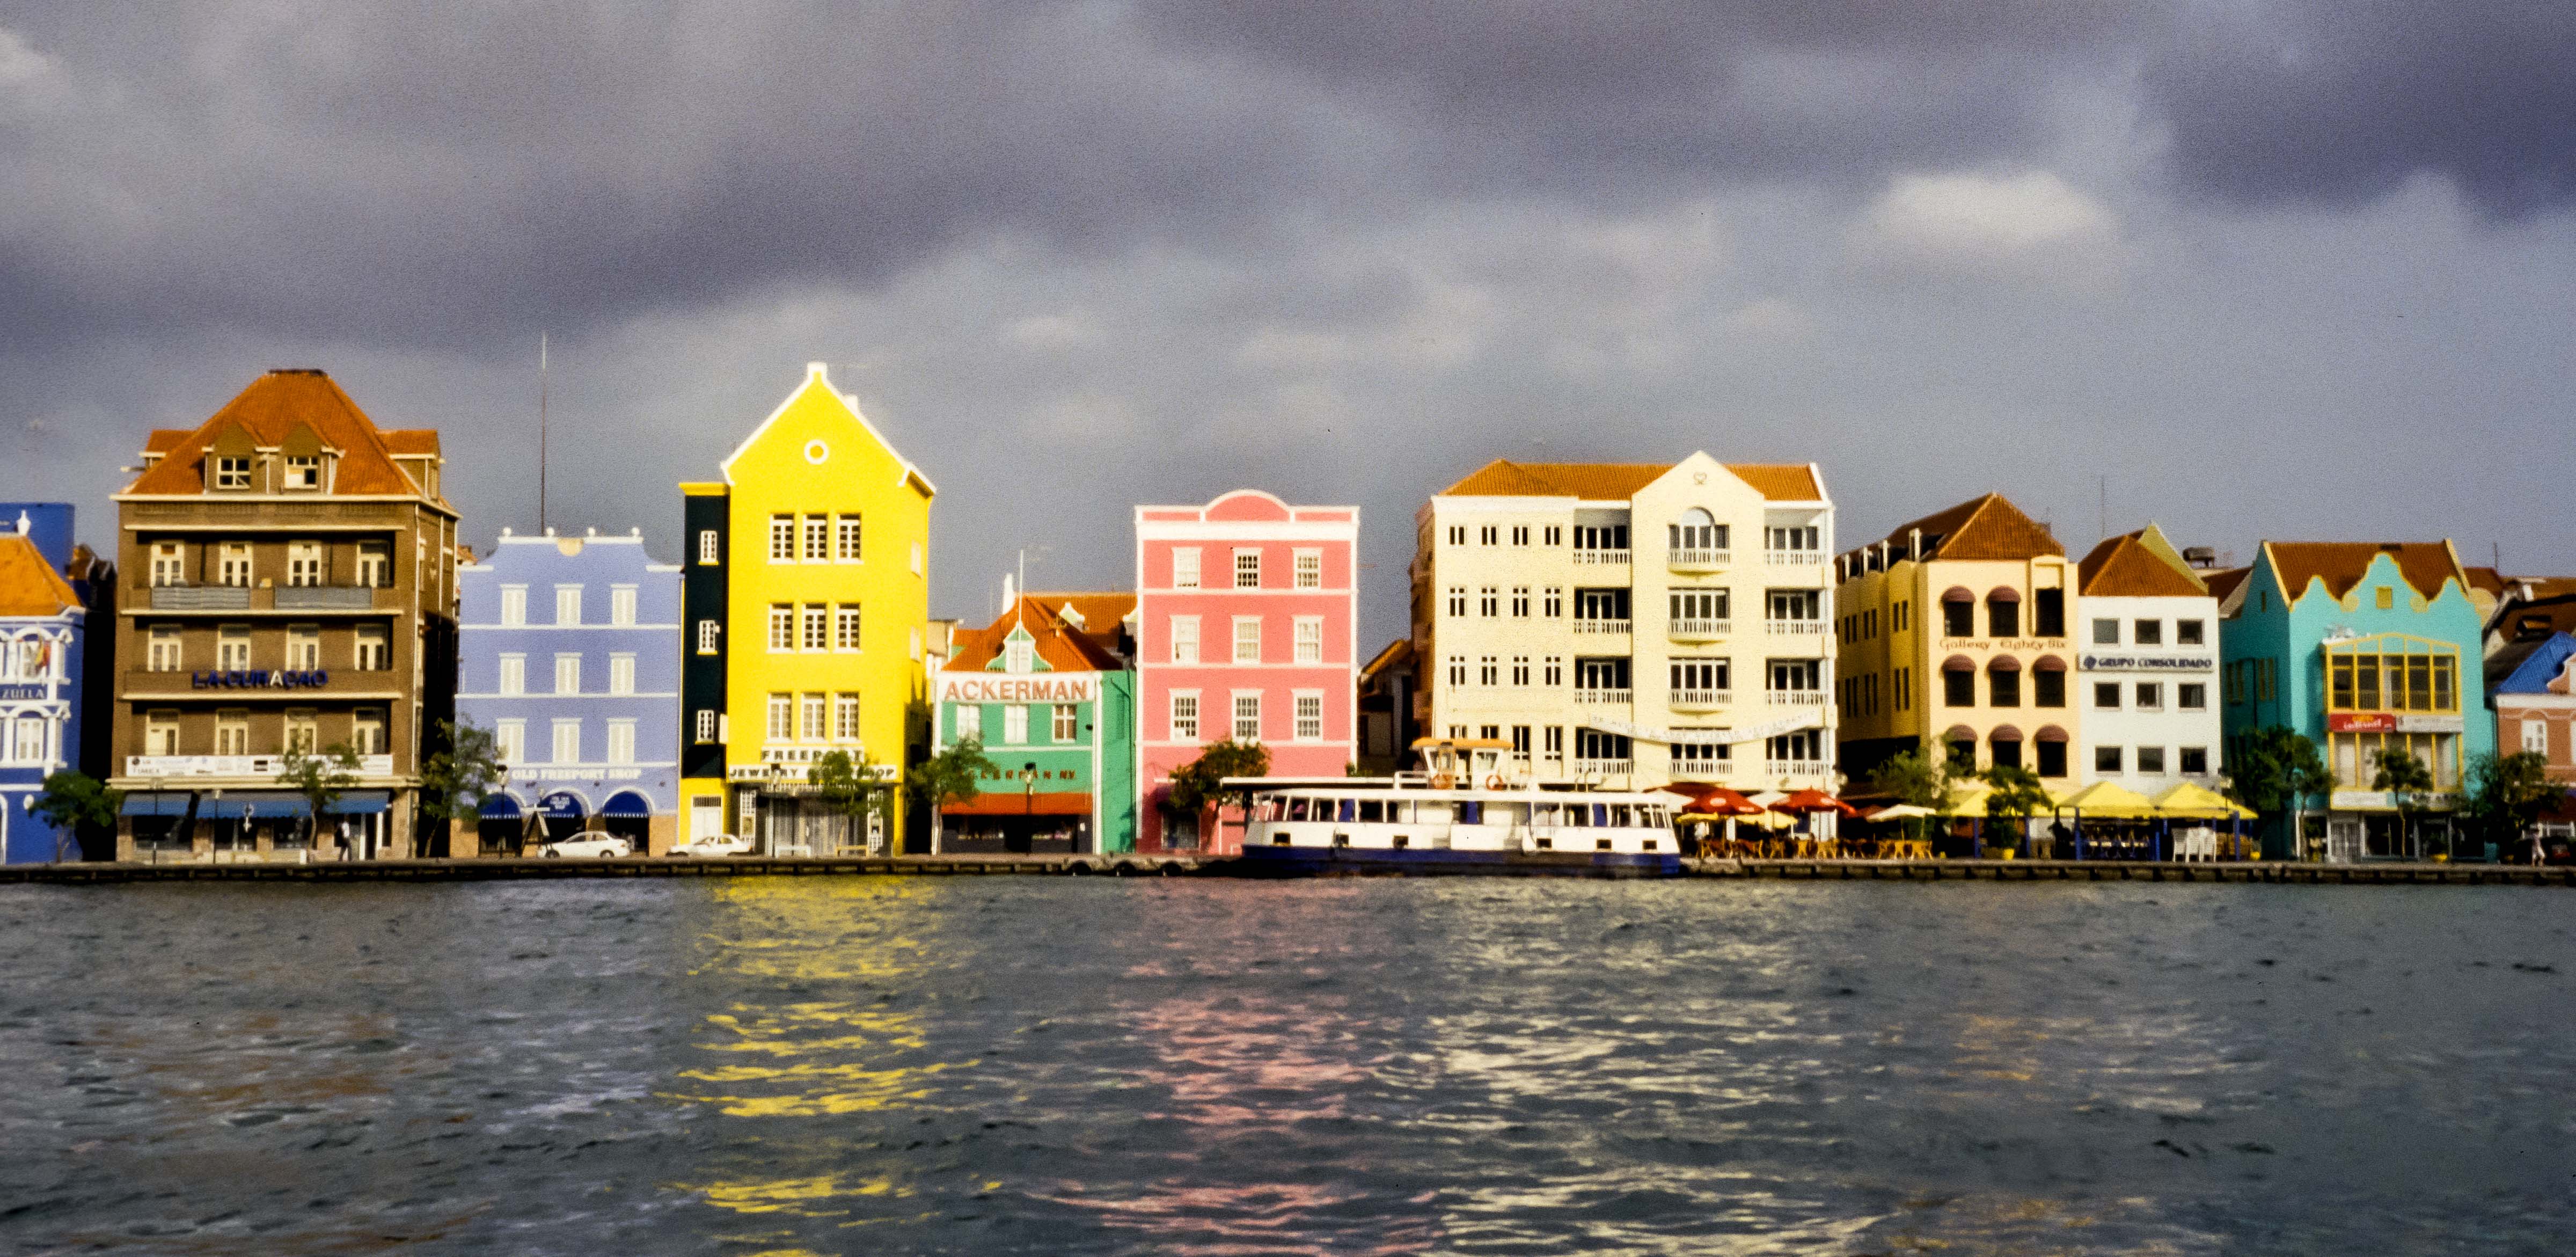 Curacao, Waterfront Promenade, 2000 – This section of waterfront in Curacao is notable because of its varied architecture and color.